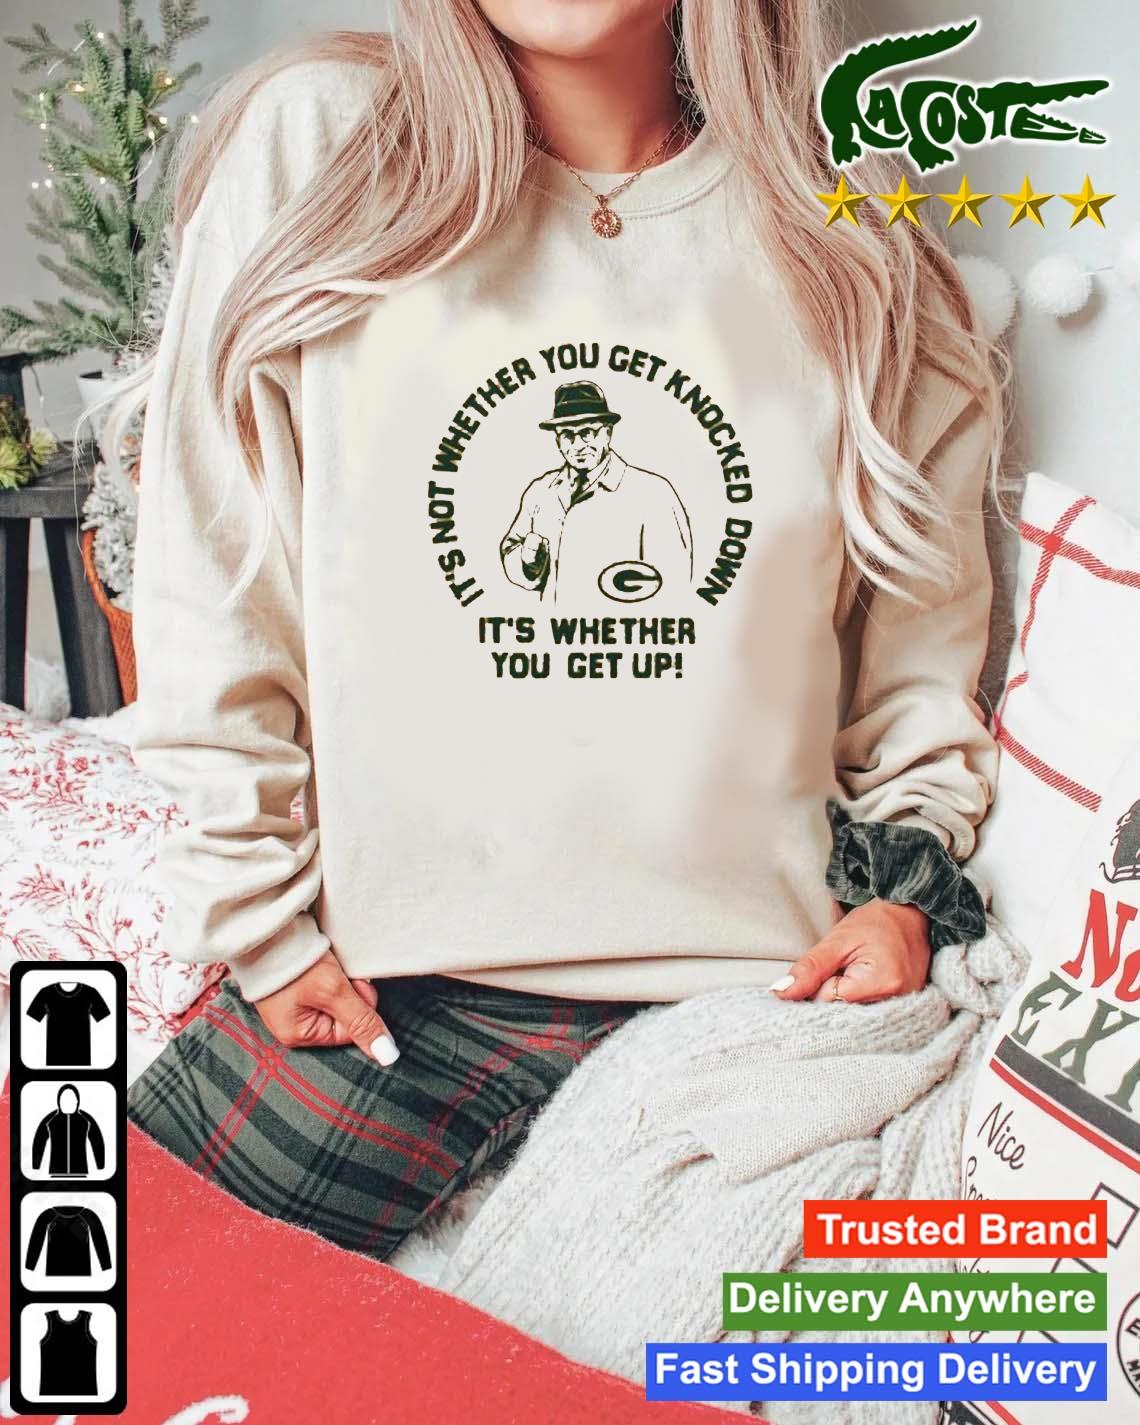 Green Bay Packers It's Not Whether You Get Knocked Down I't Whether You Get Up Sweats Mockup Sweater